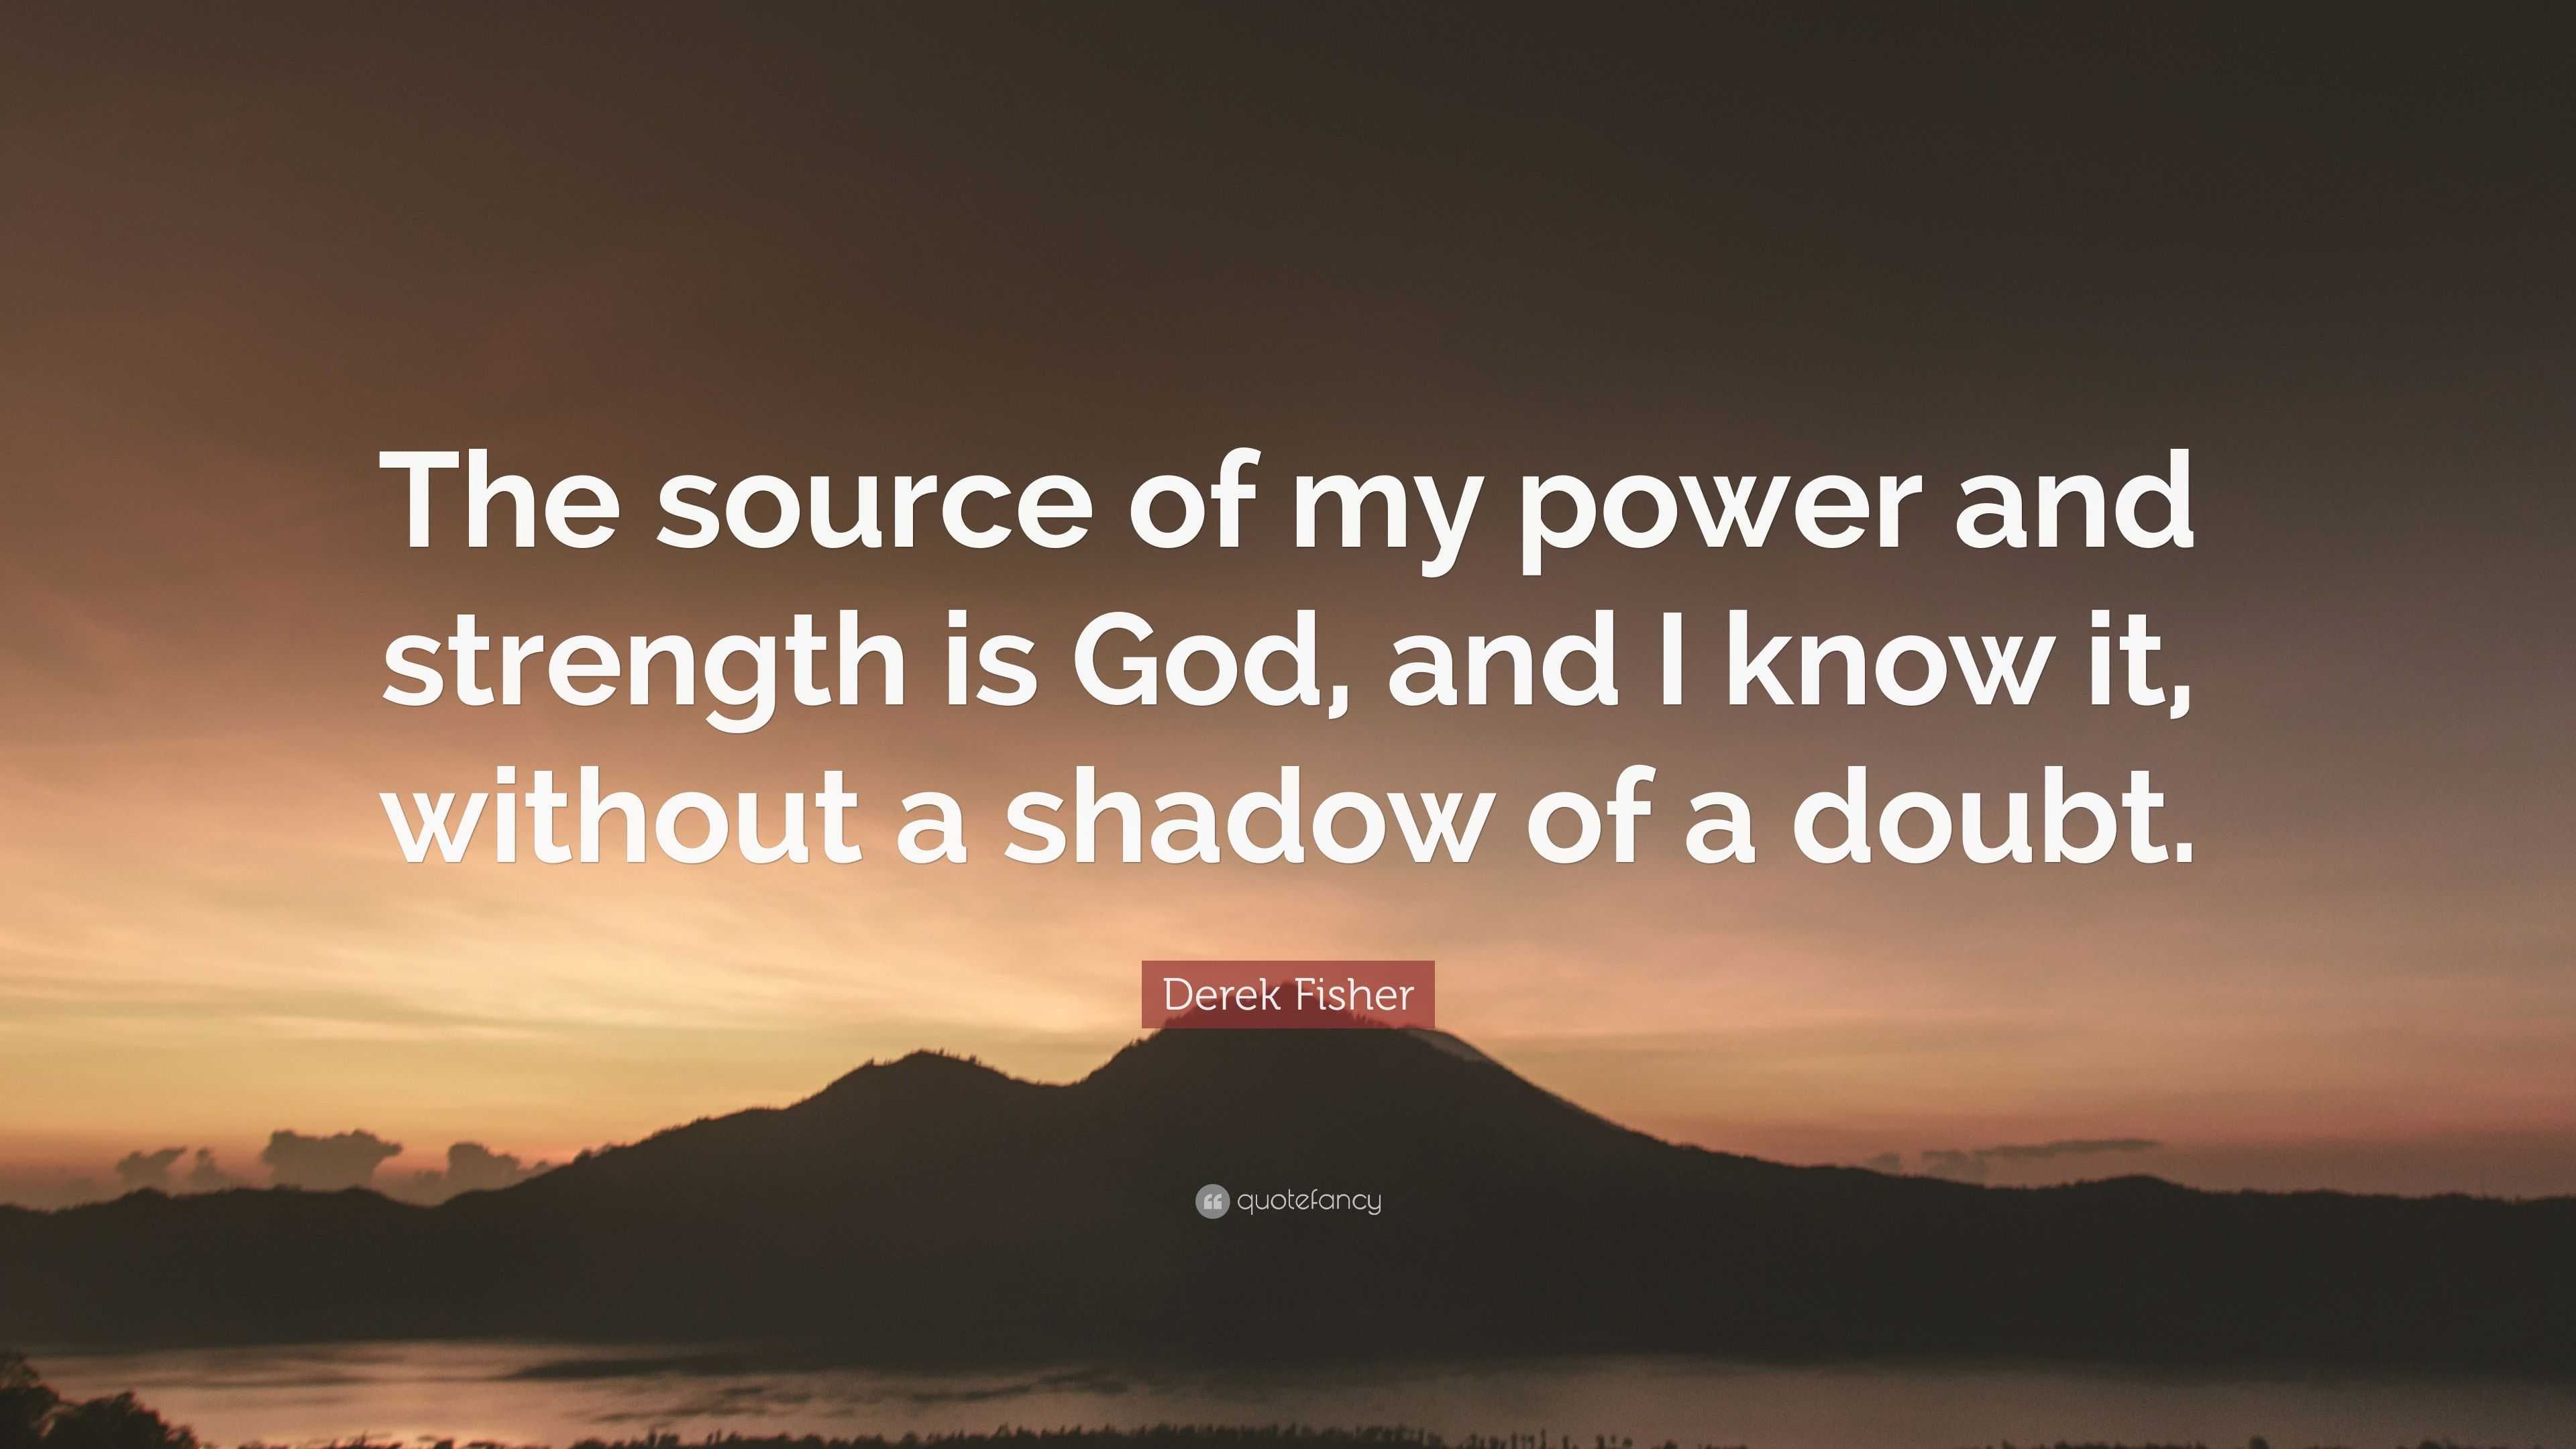 without a shadow of a doubt i know the lord is with me always